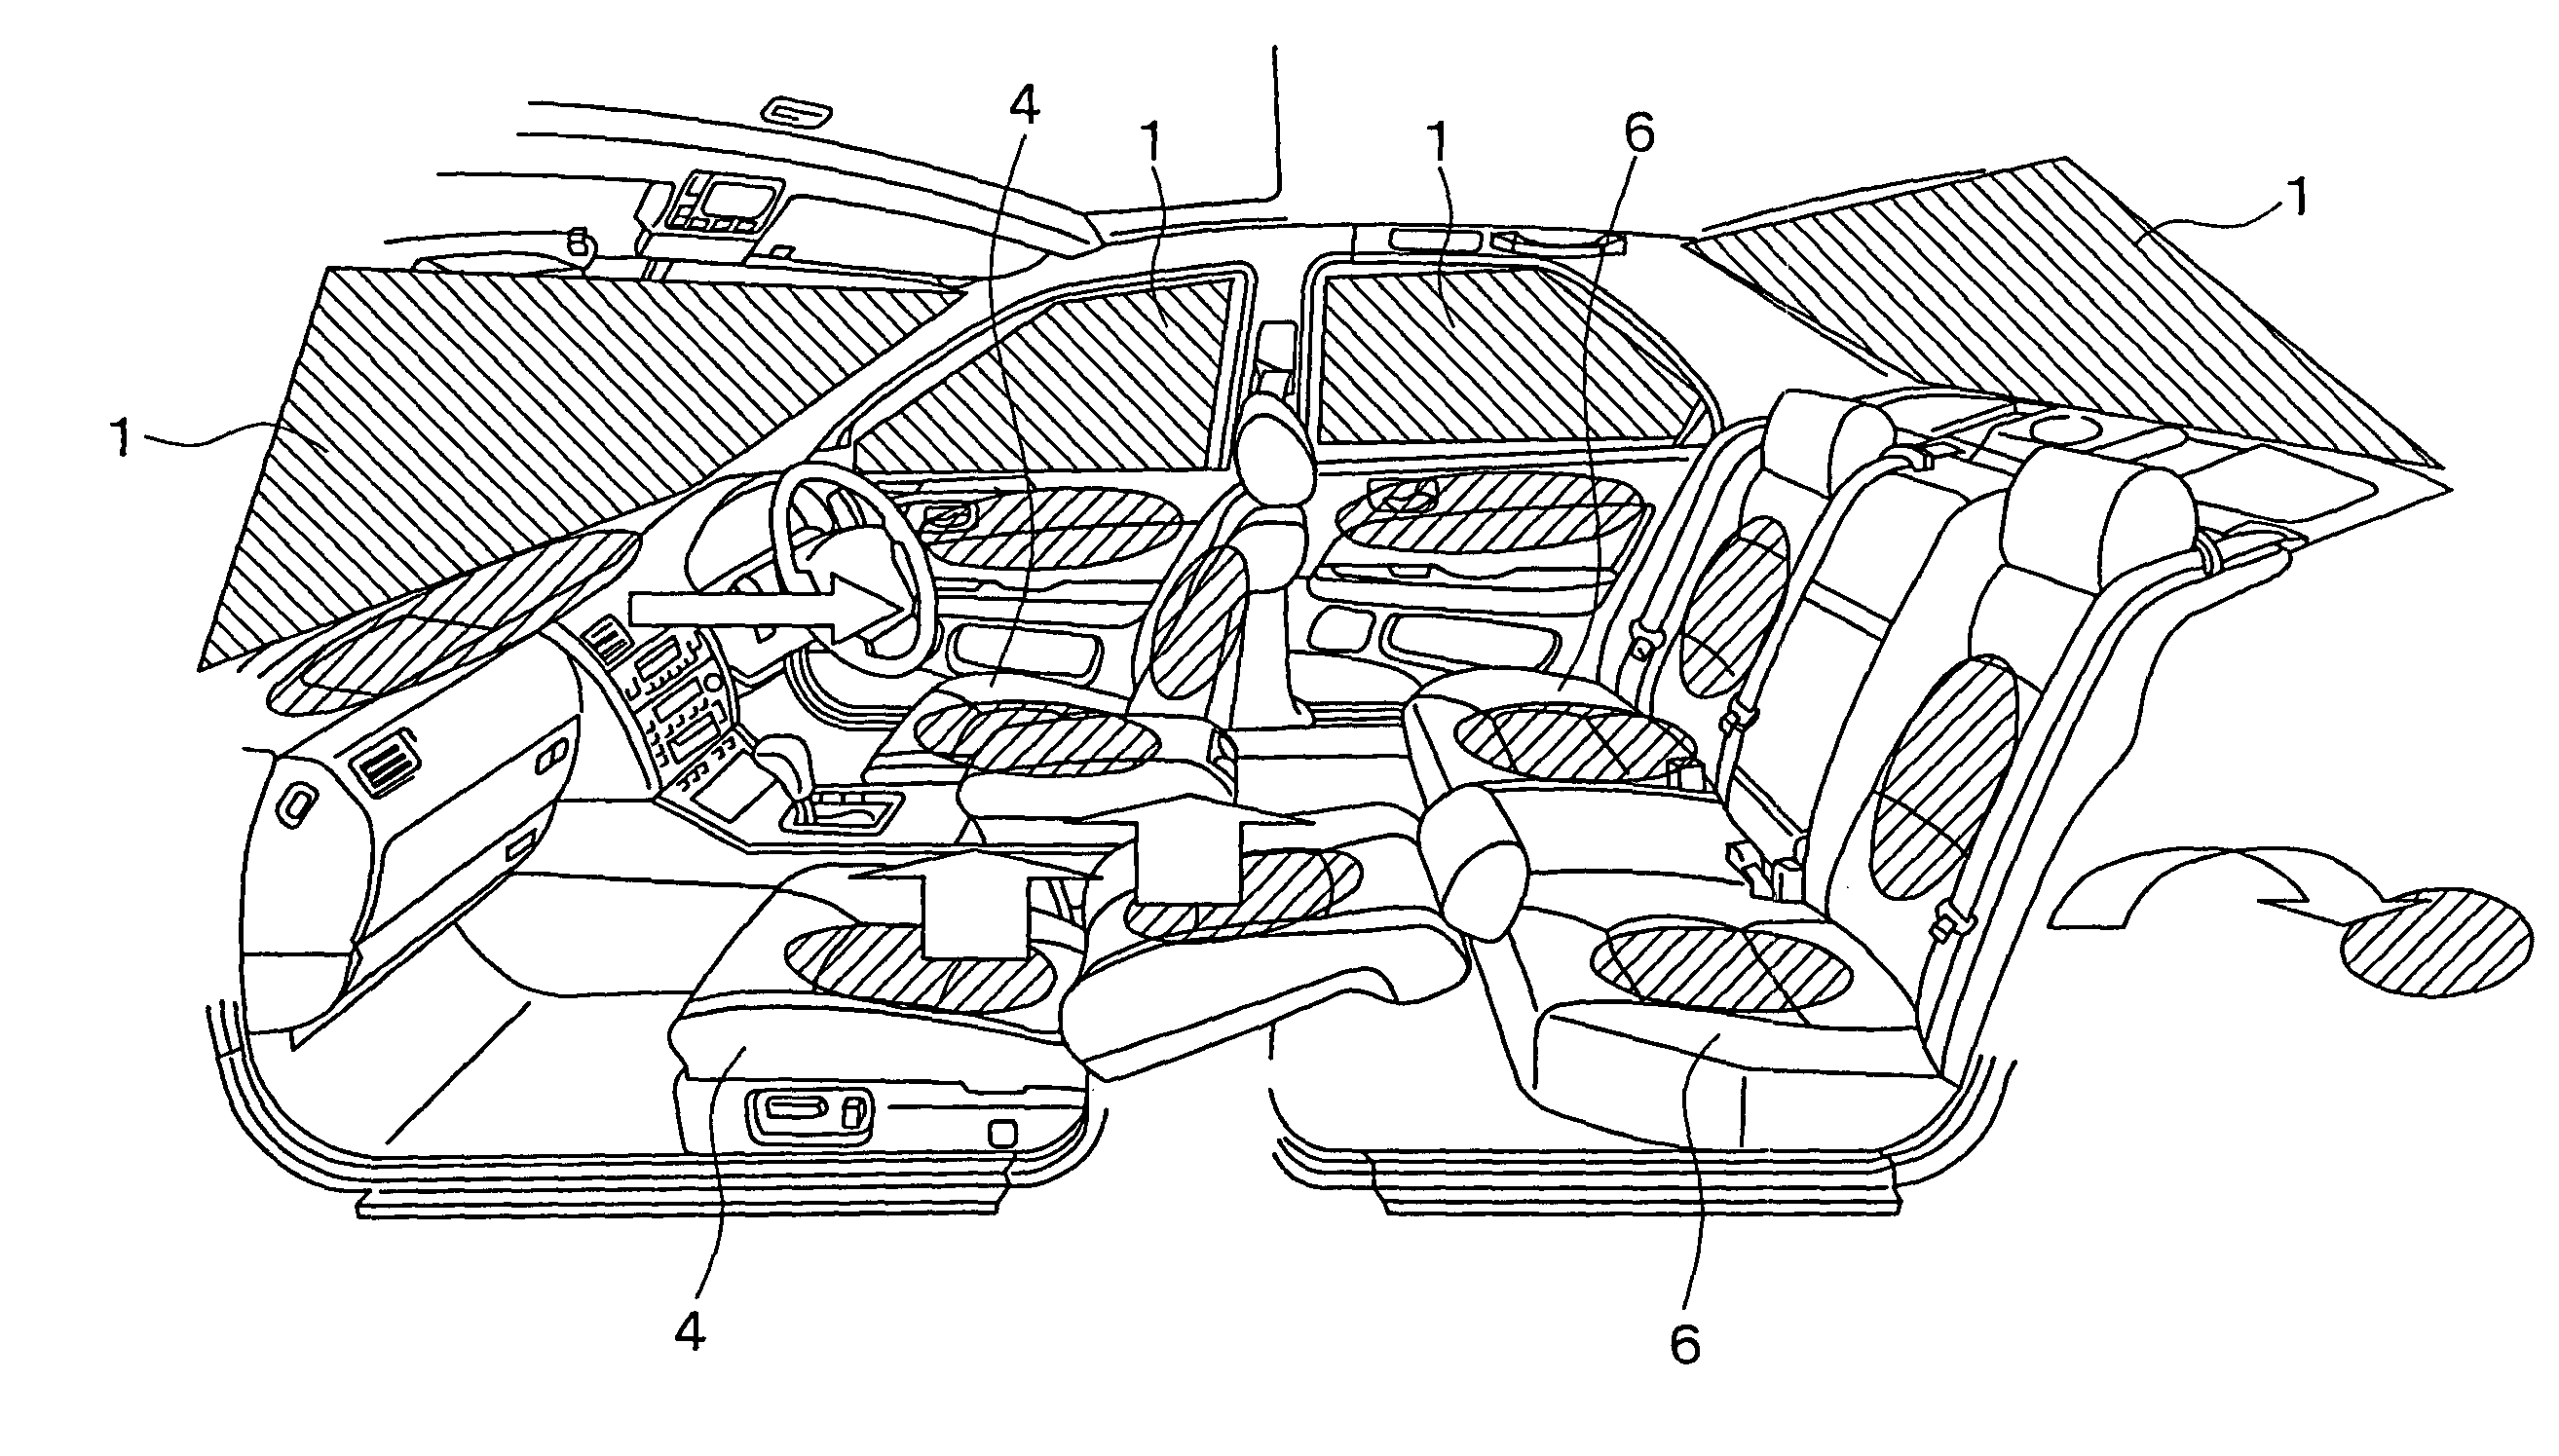 System for limiting an increase in the inside air temperature of passenger compartment of vehicle